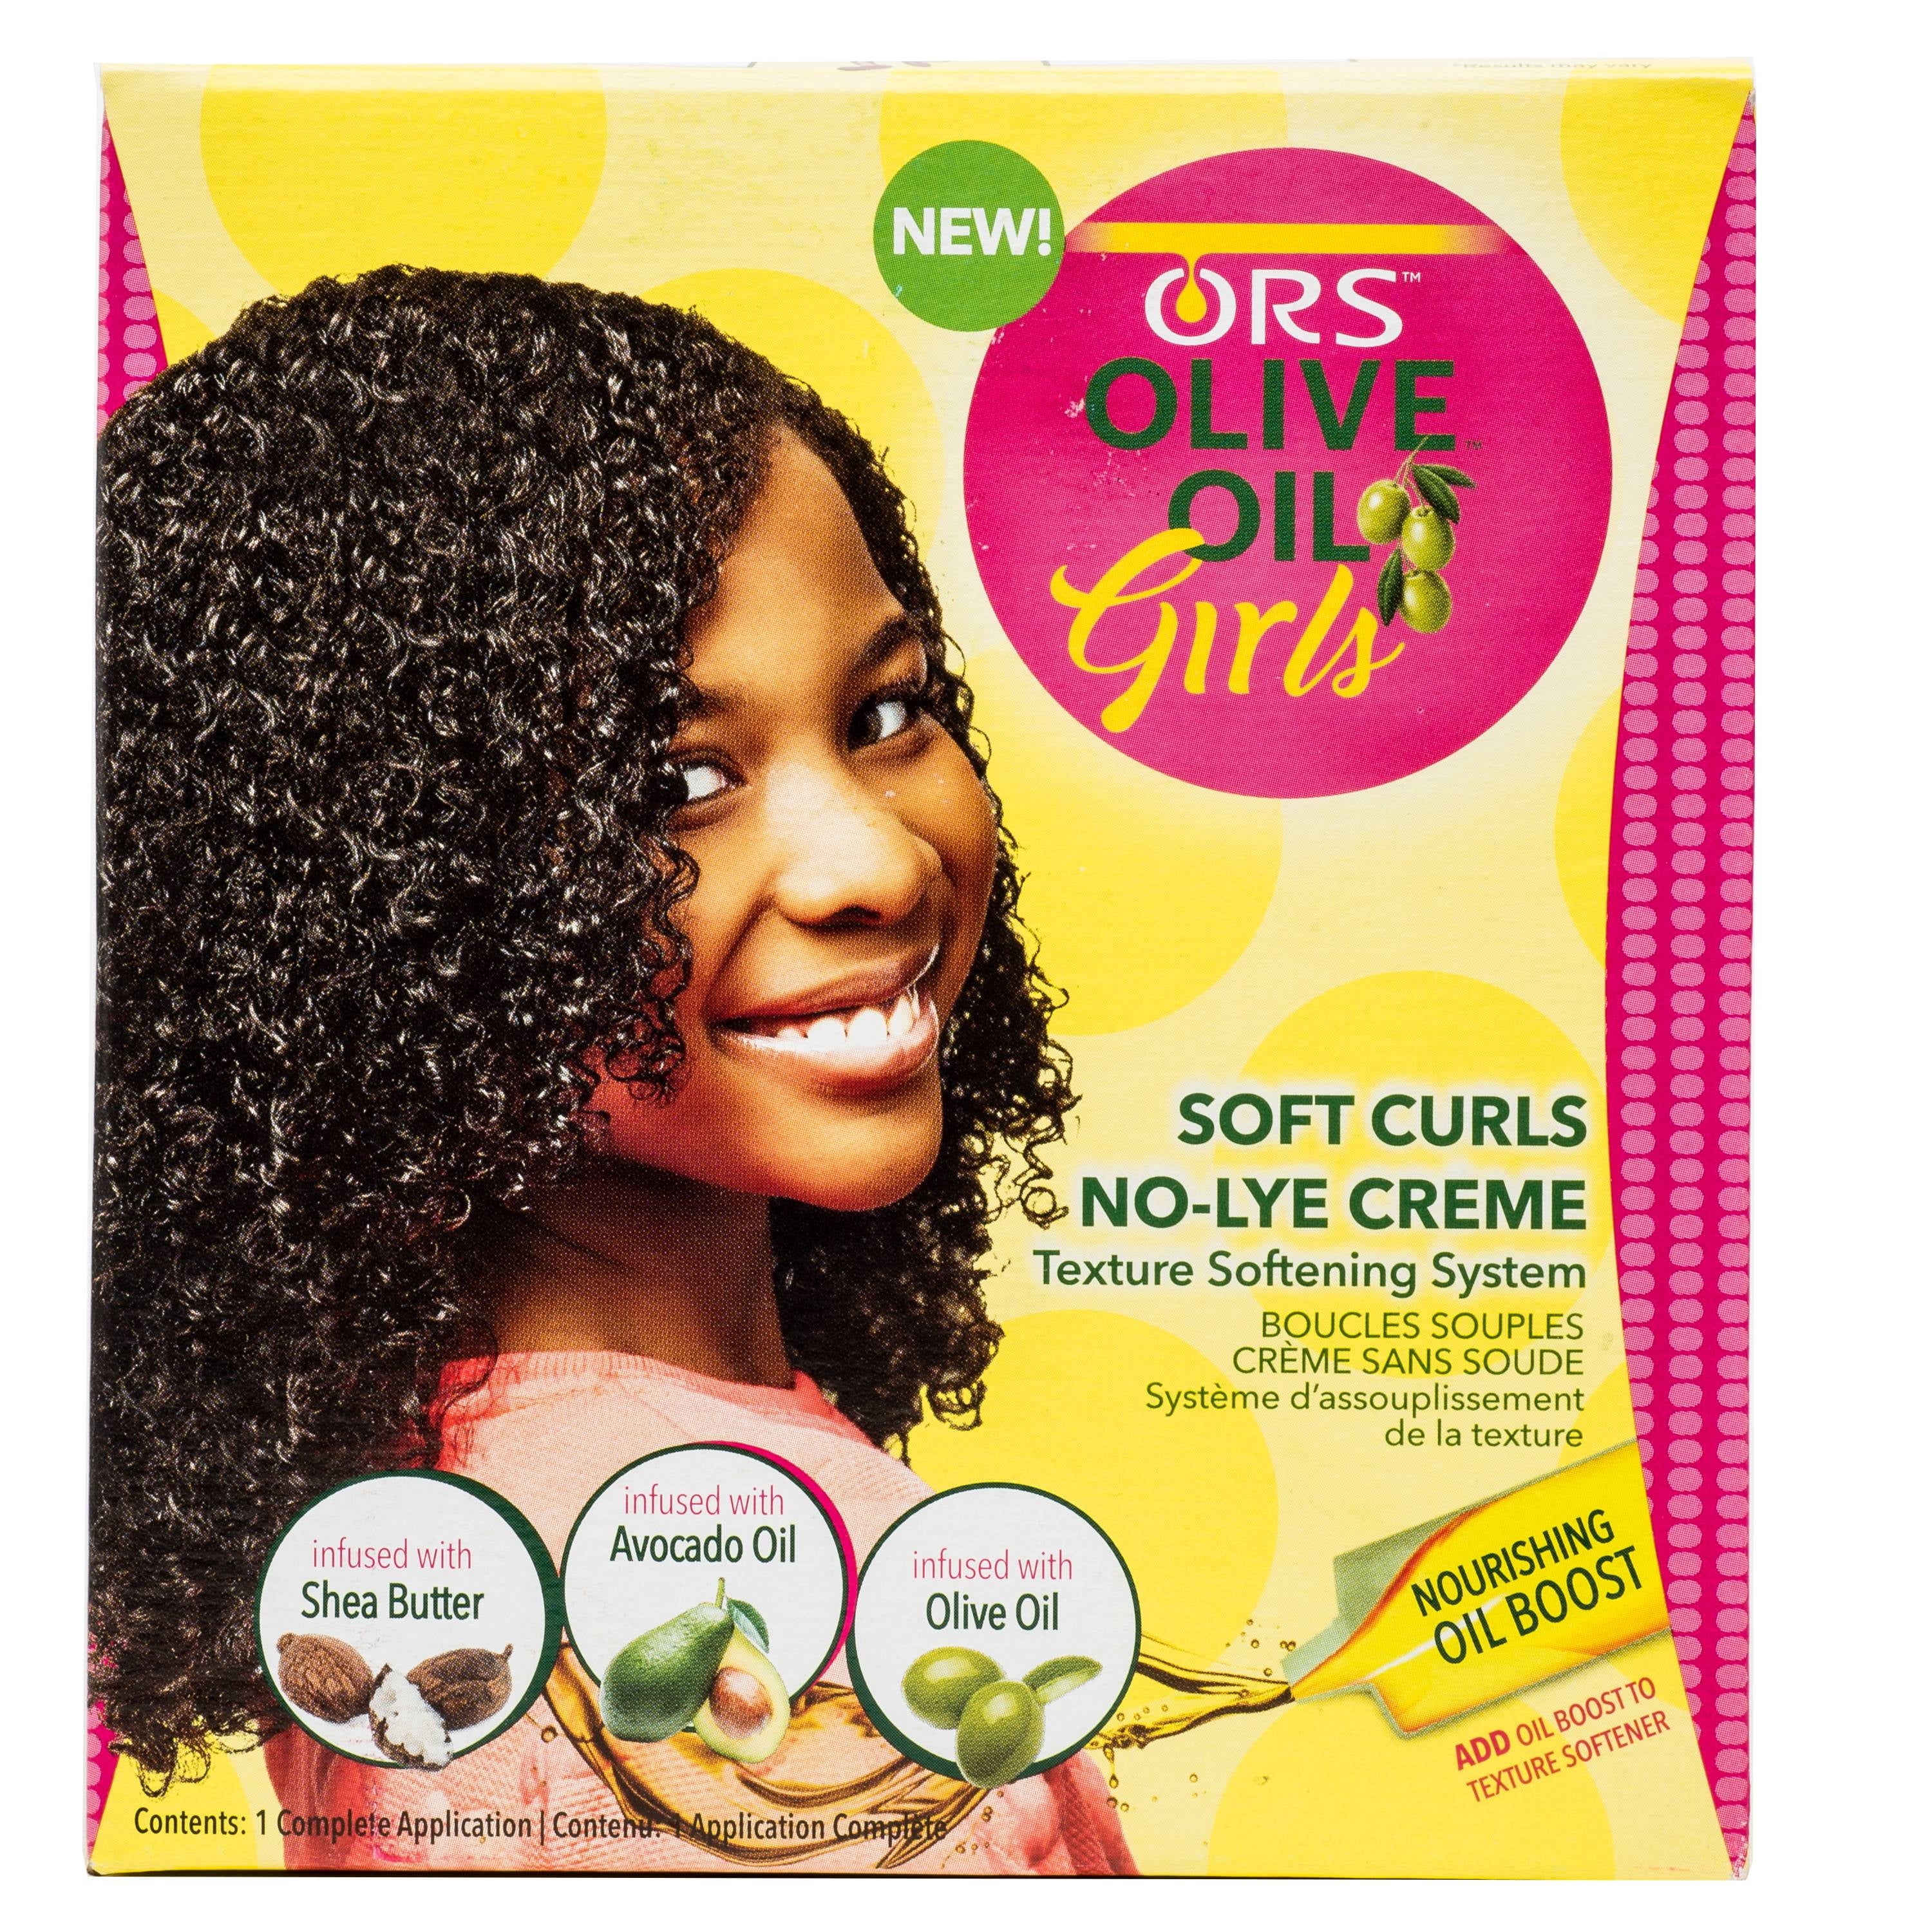 ORS Olive Oil Girls Soft Curls No-Lye Creme Texture Softening System Kit -  